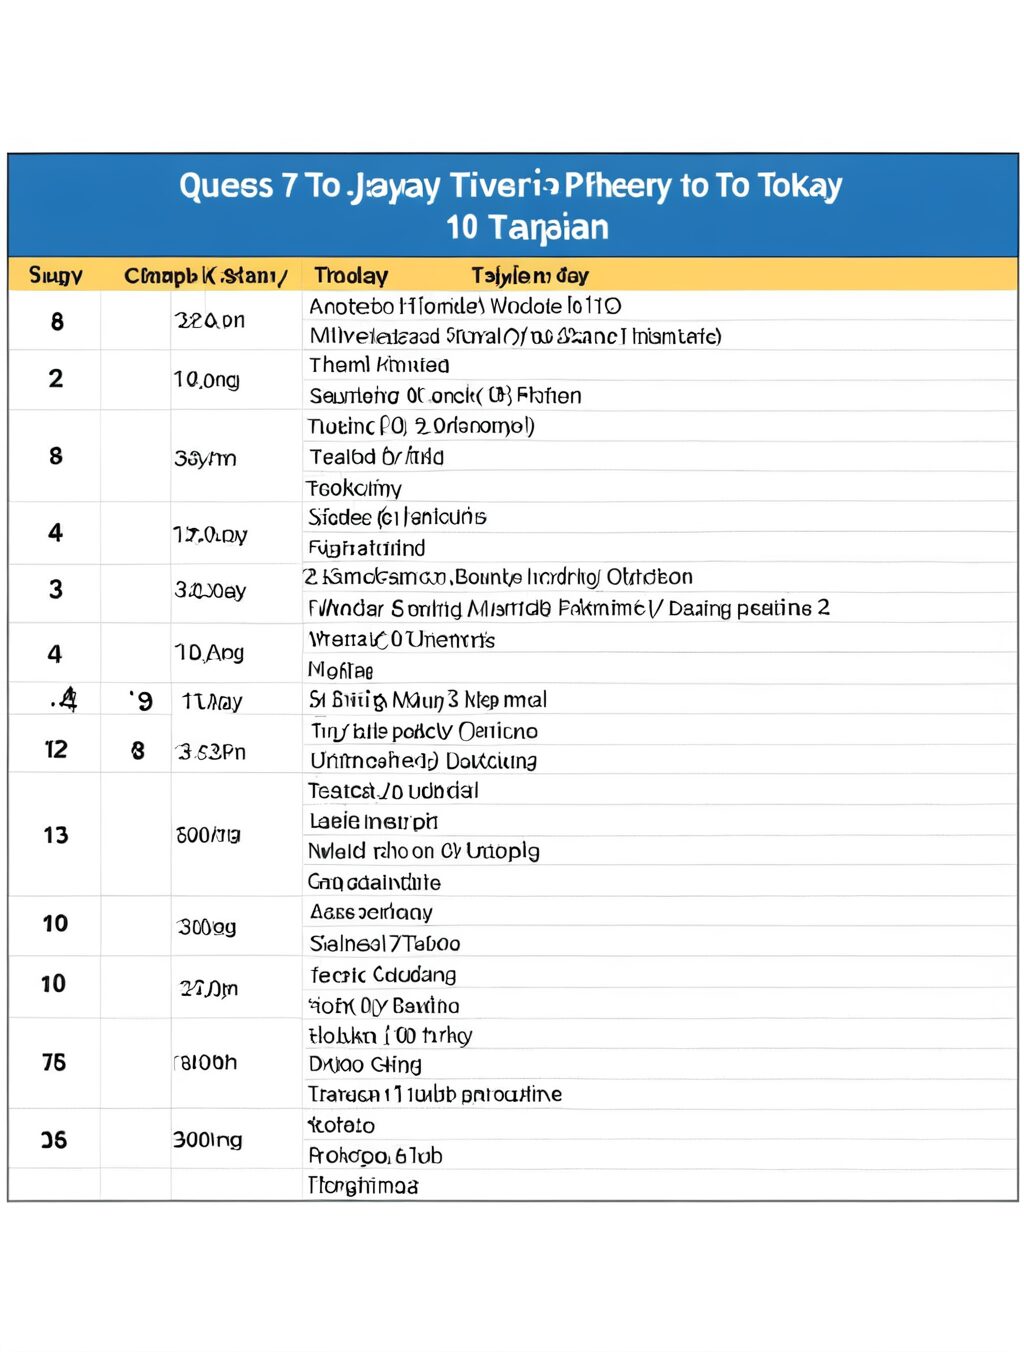 japan 7 day itinerary from tokyo